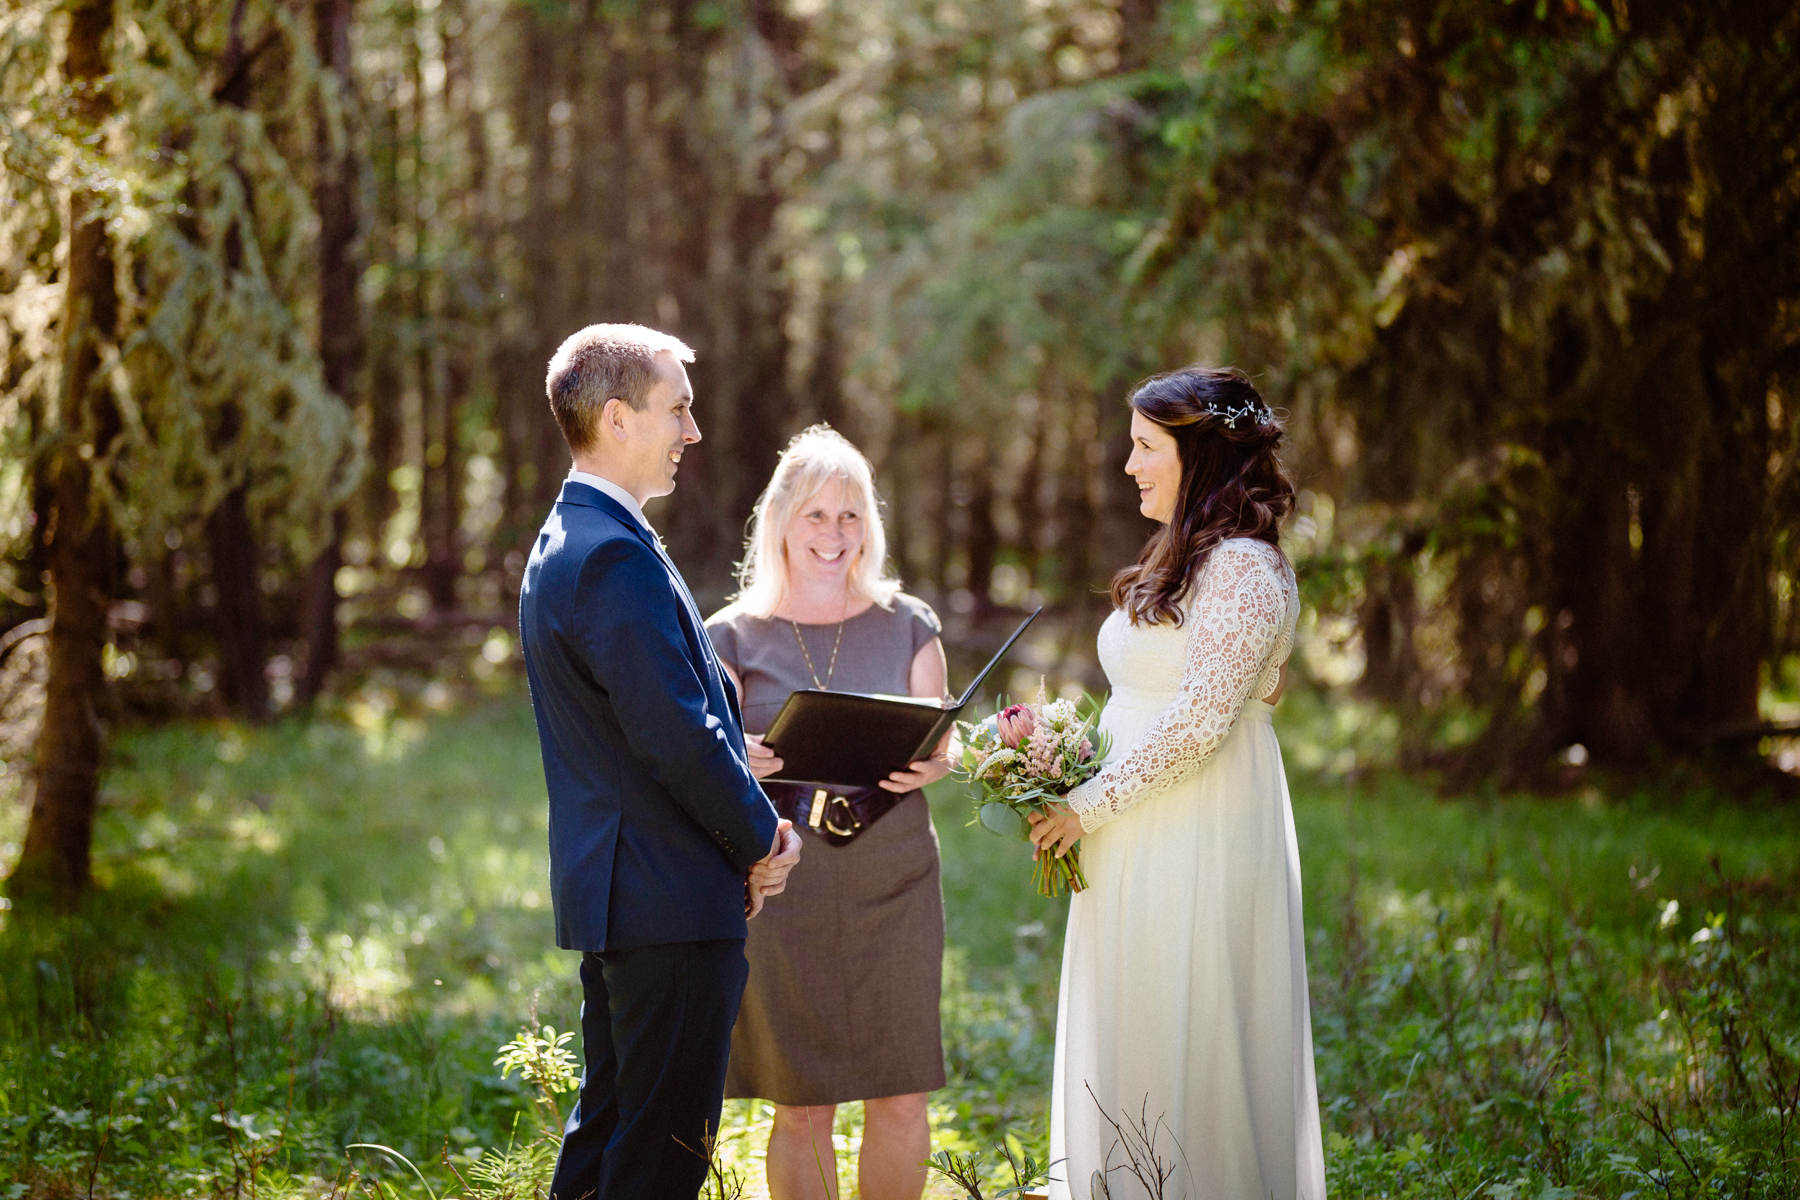 Vow Renewal Photography in Banff - Image 2